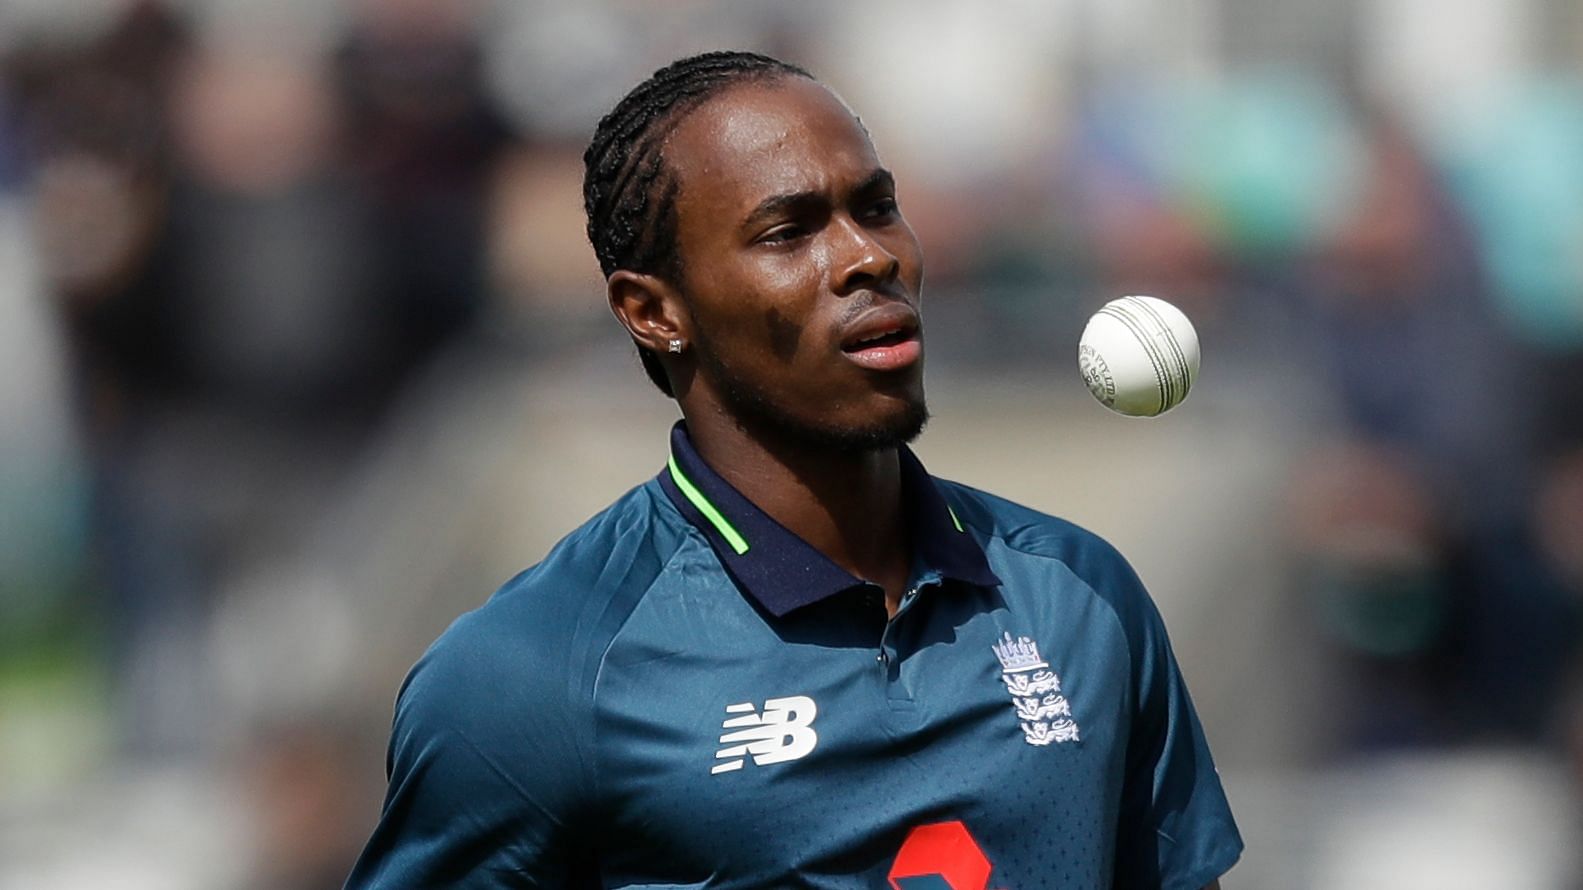 New Zealand Cricket has lodged an official complaint with police over the alleged racial abuse of England fast bowler Jofra Archer.